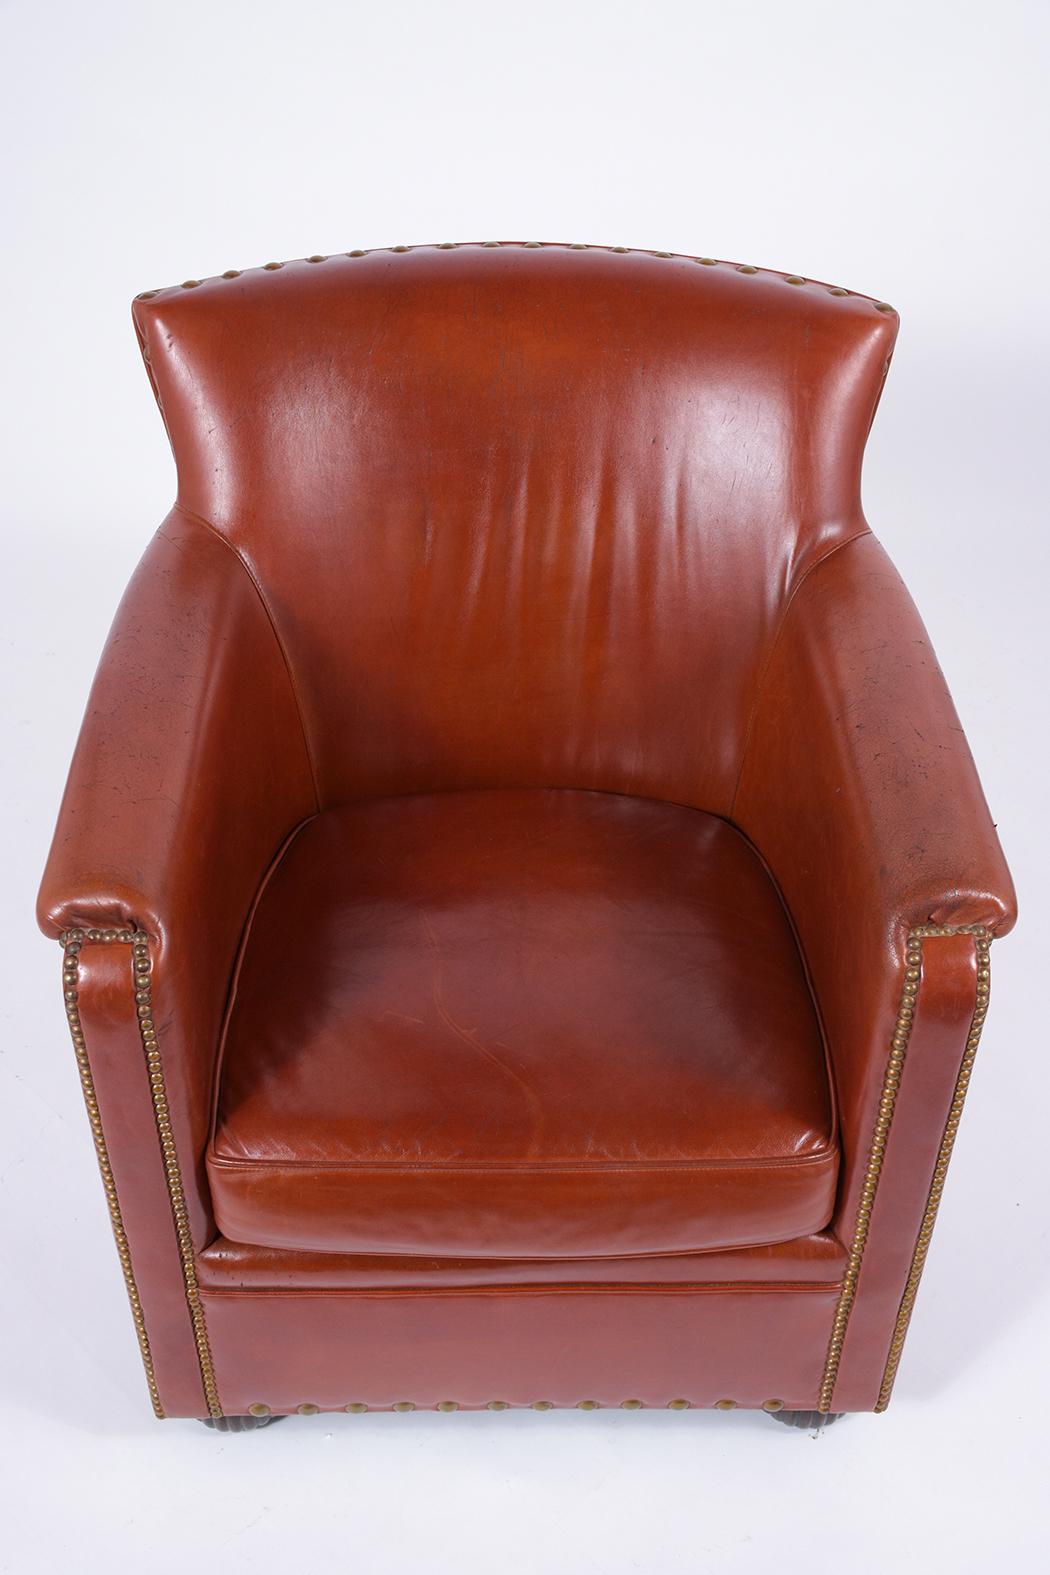 Carved Pair of Art Deco Leather Club Chairs